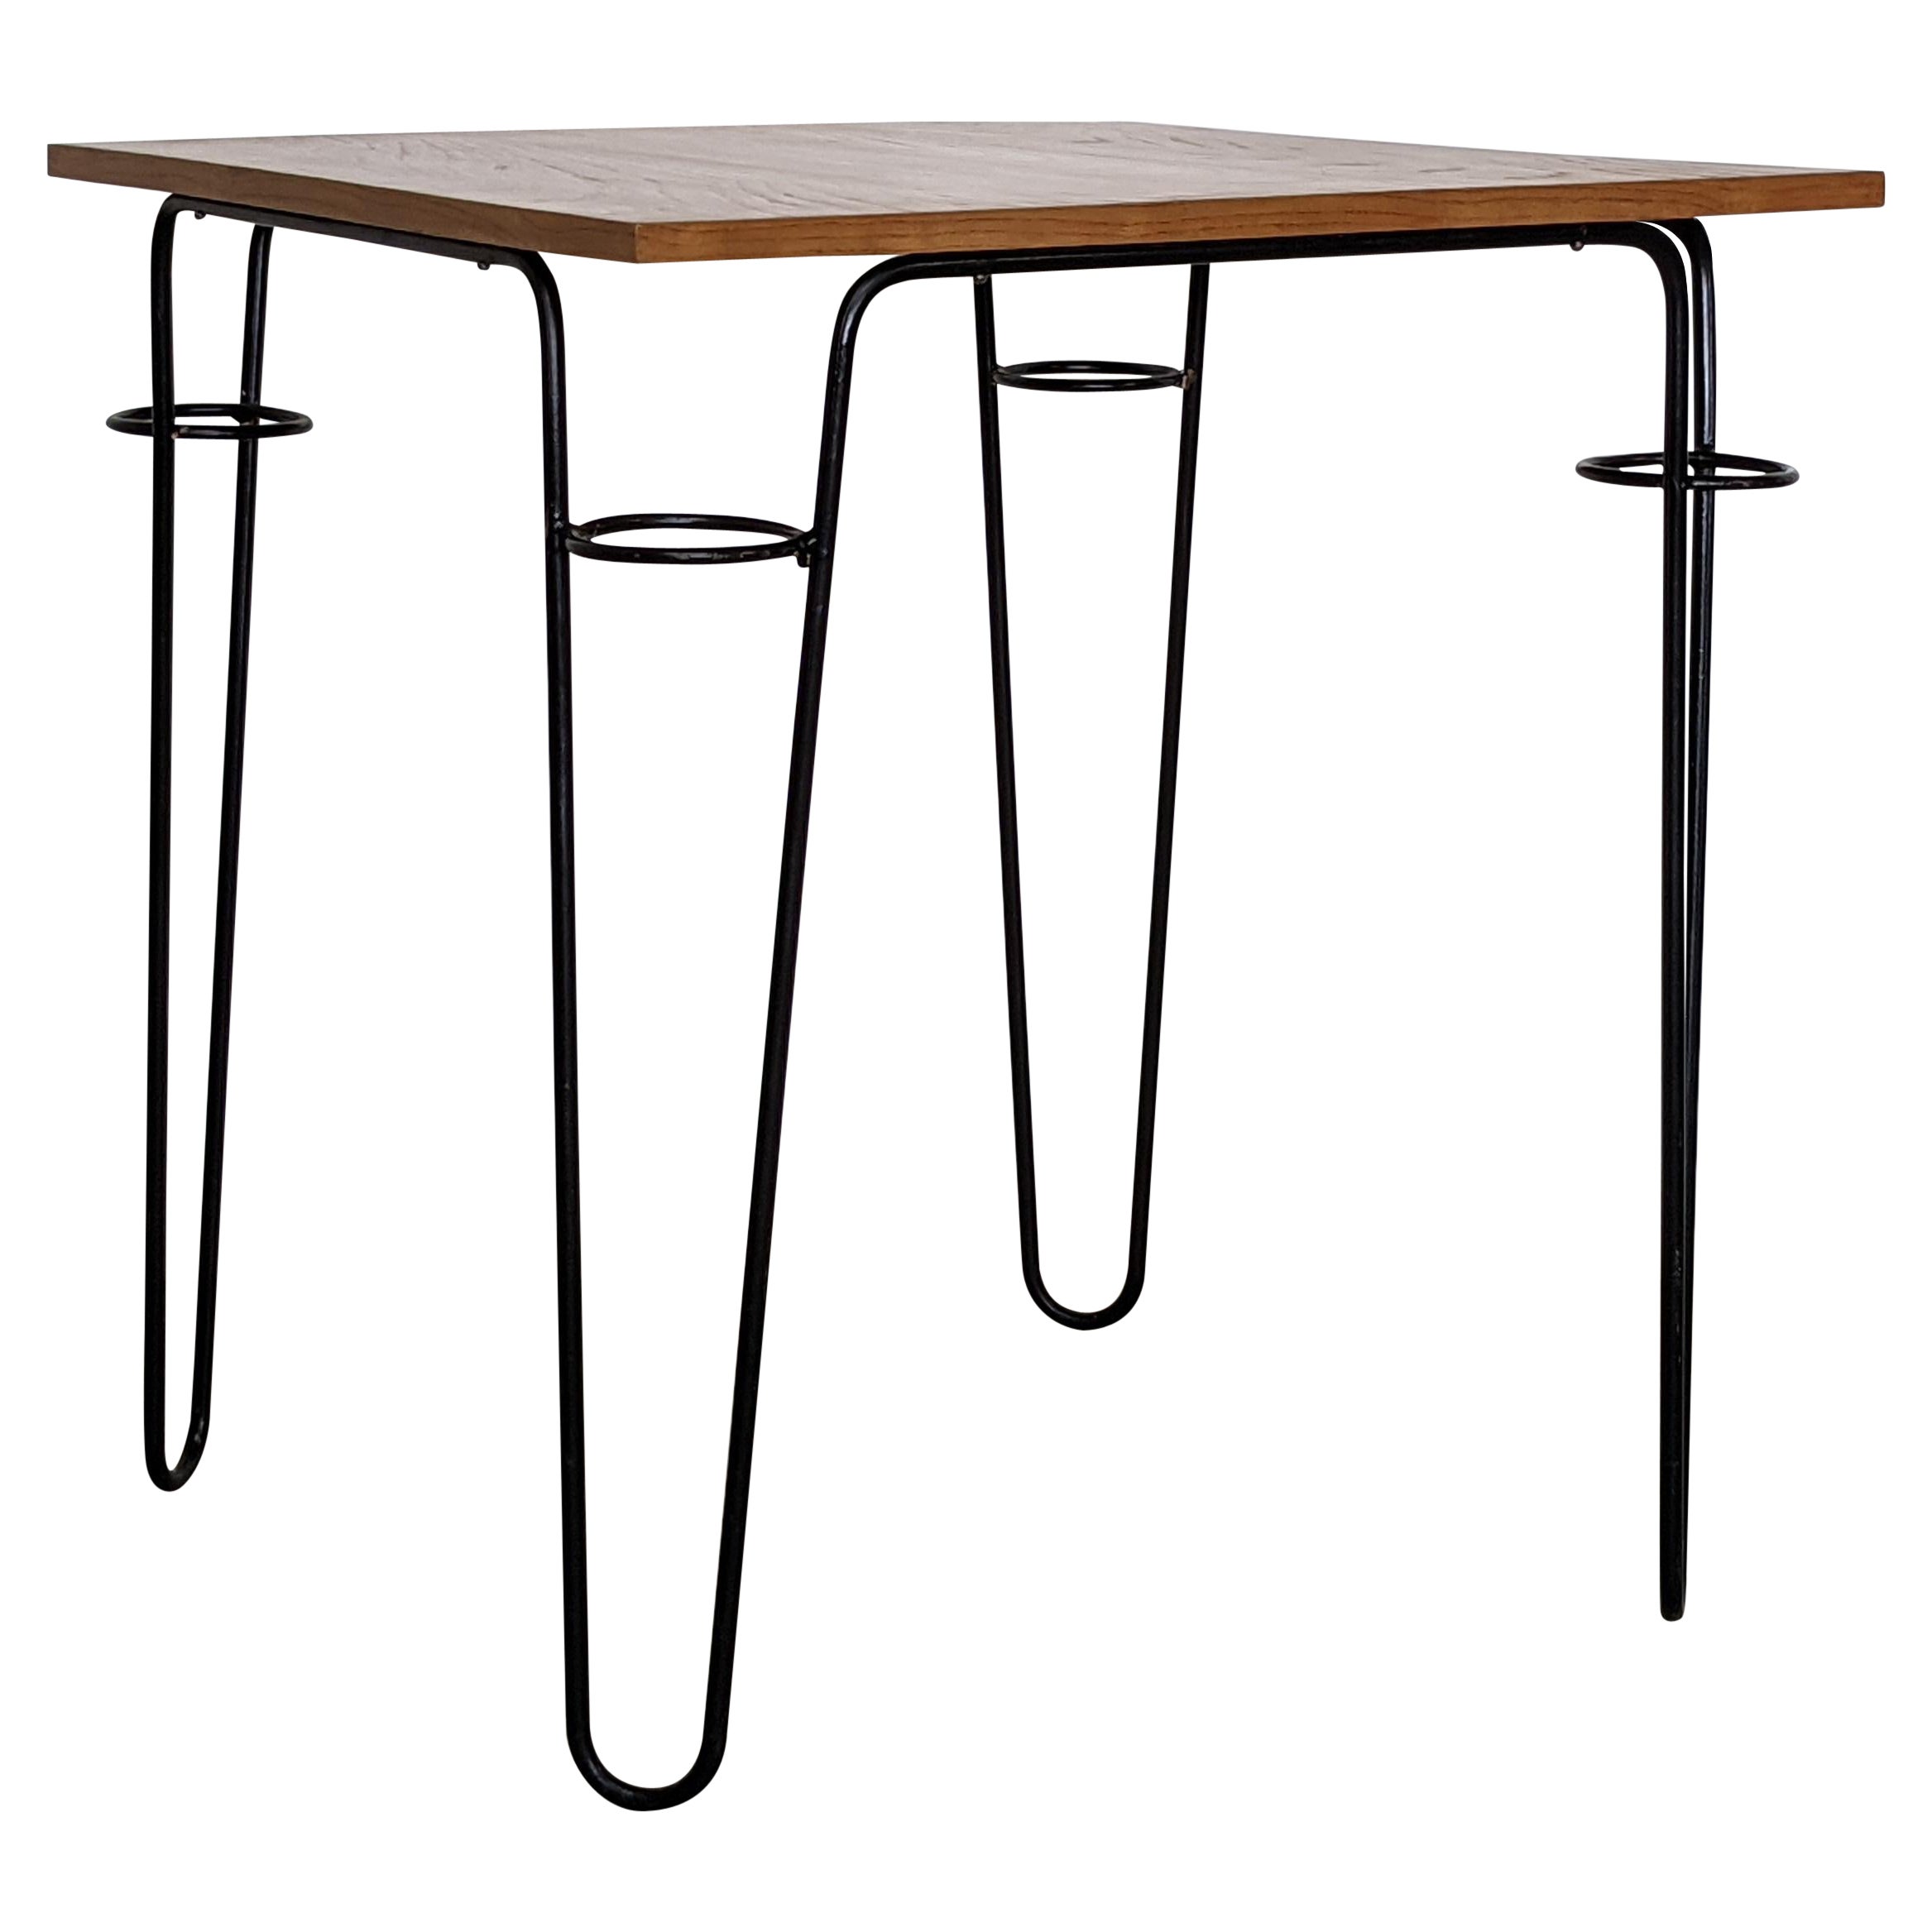 Raoul Guys Square Table in Lacquered Metal and Ash Wood Veneer, France 1950s